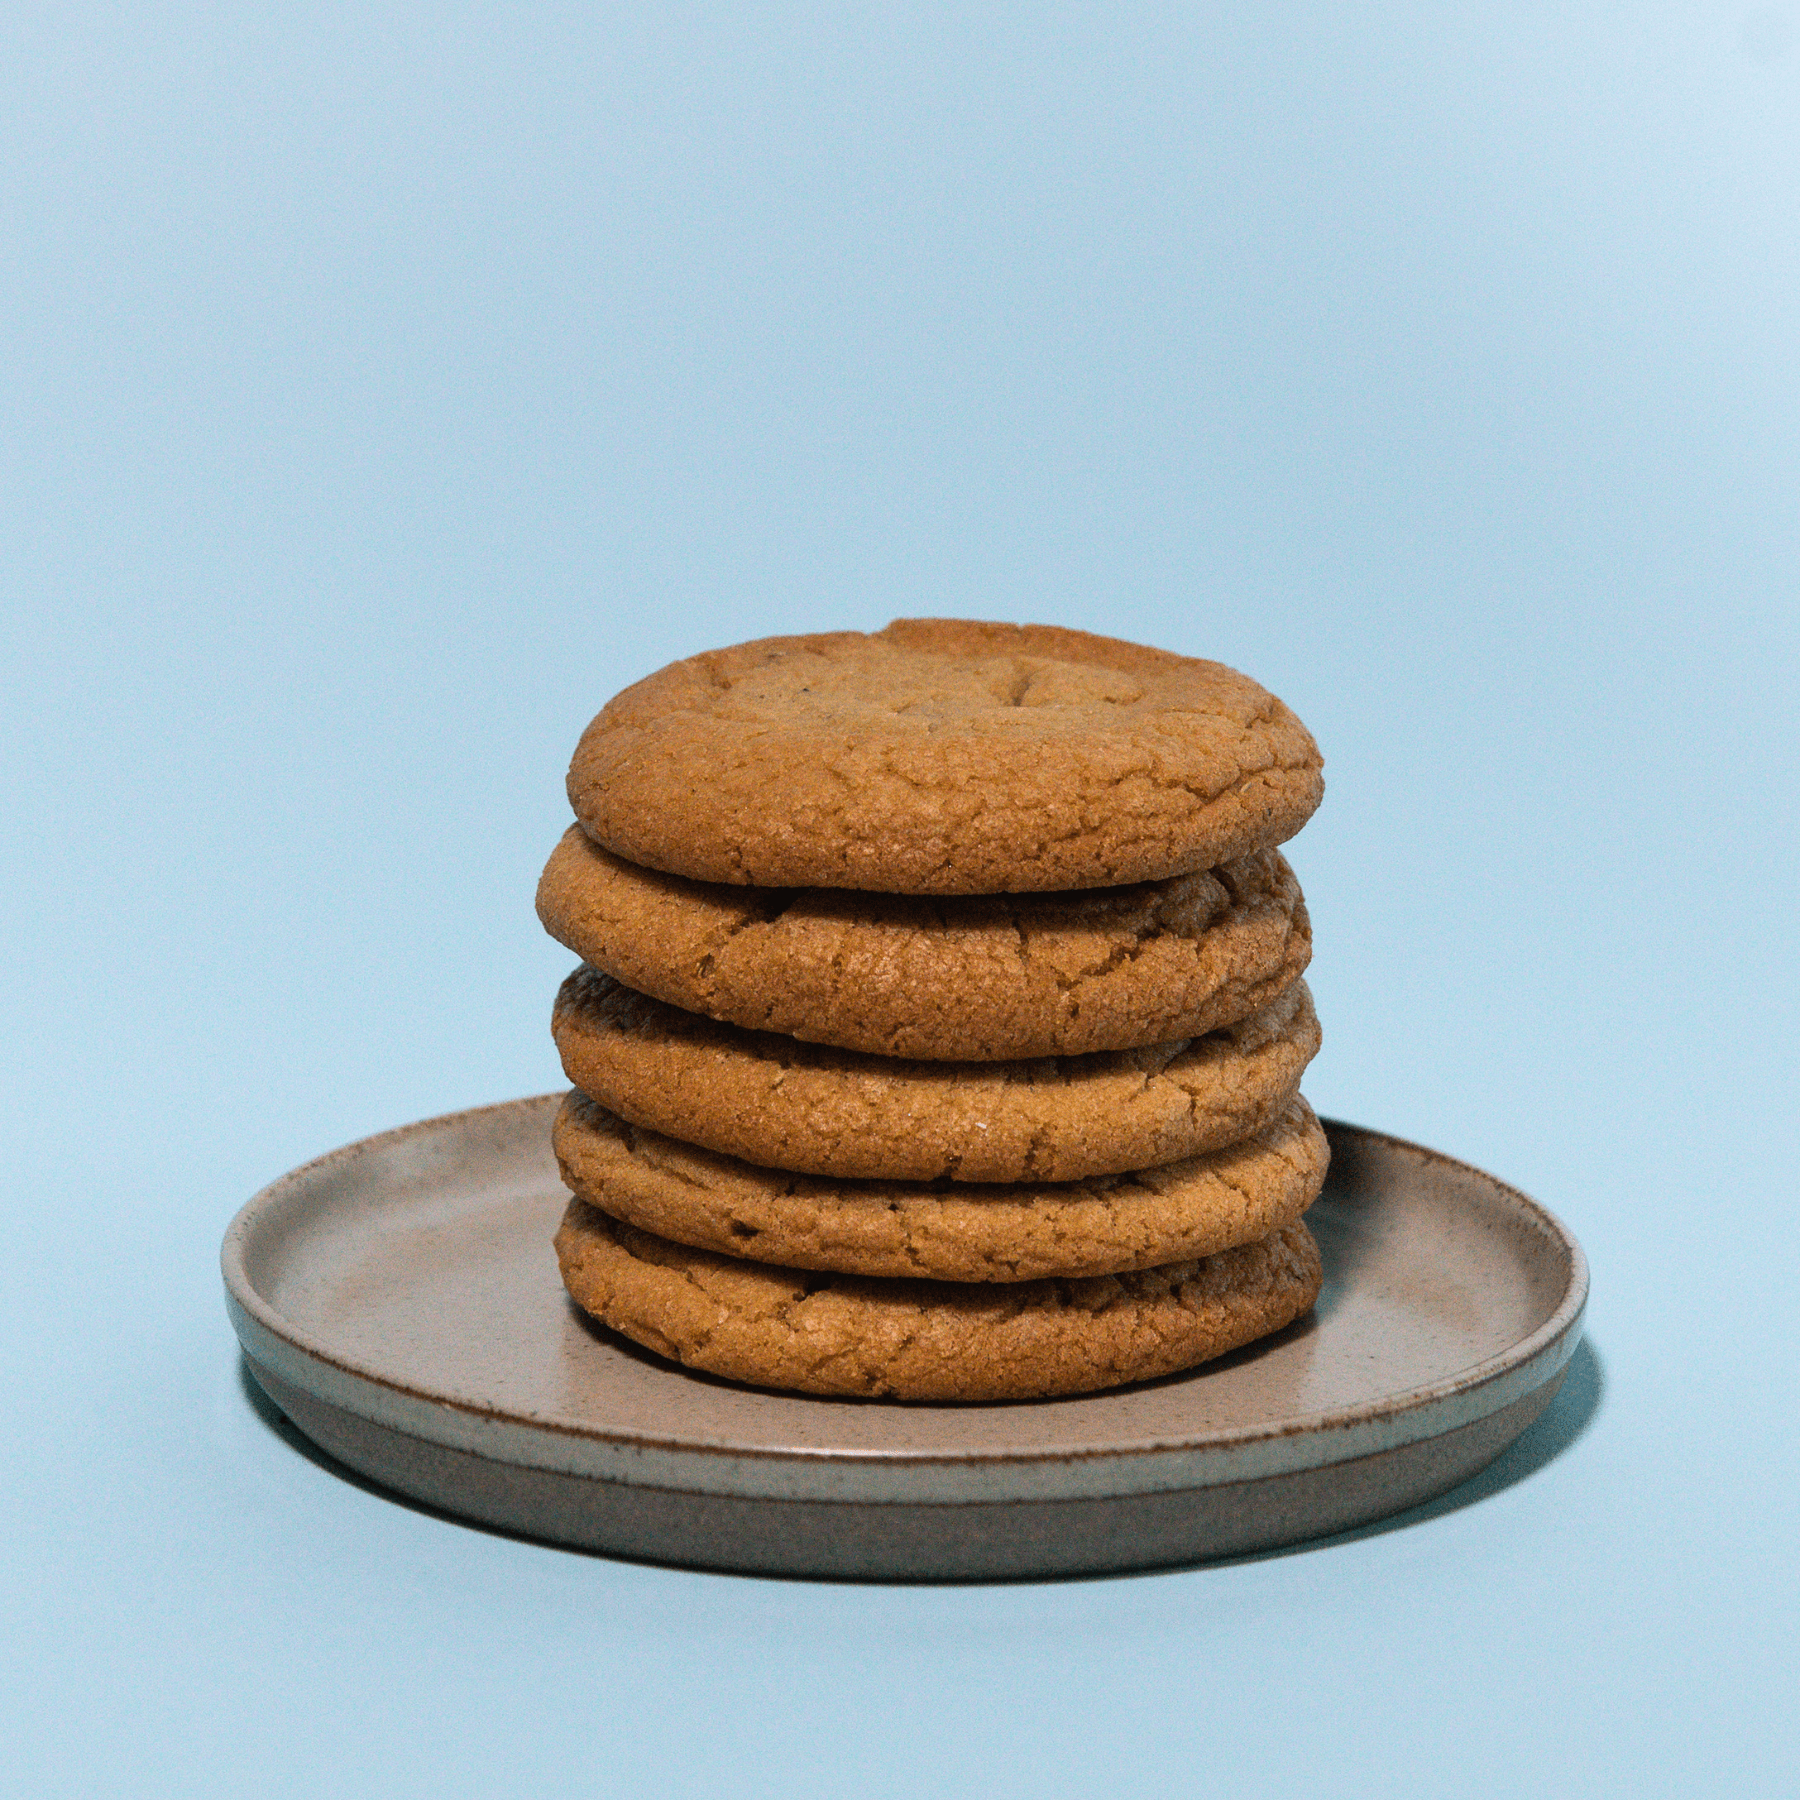 Rosemary Balsamic cookies stacked